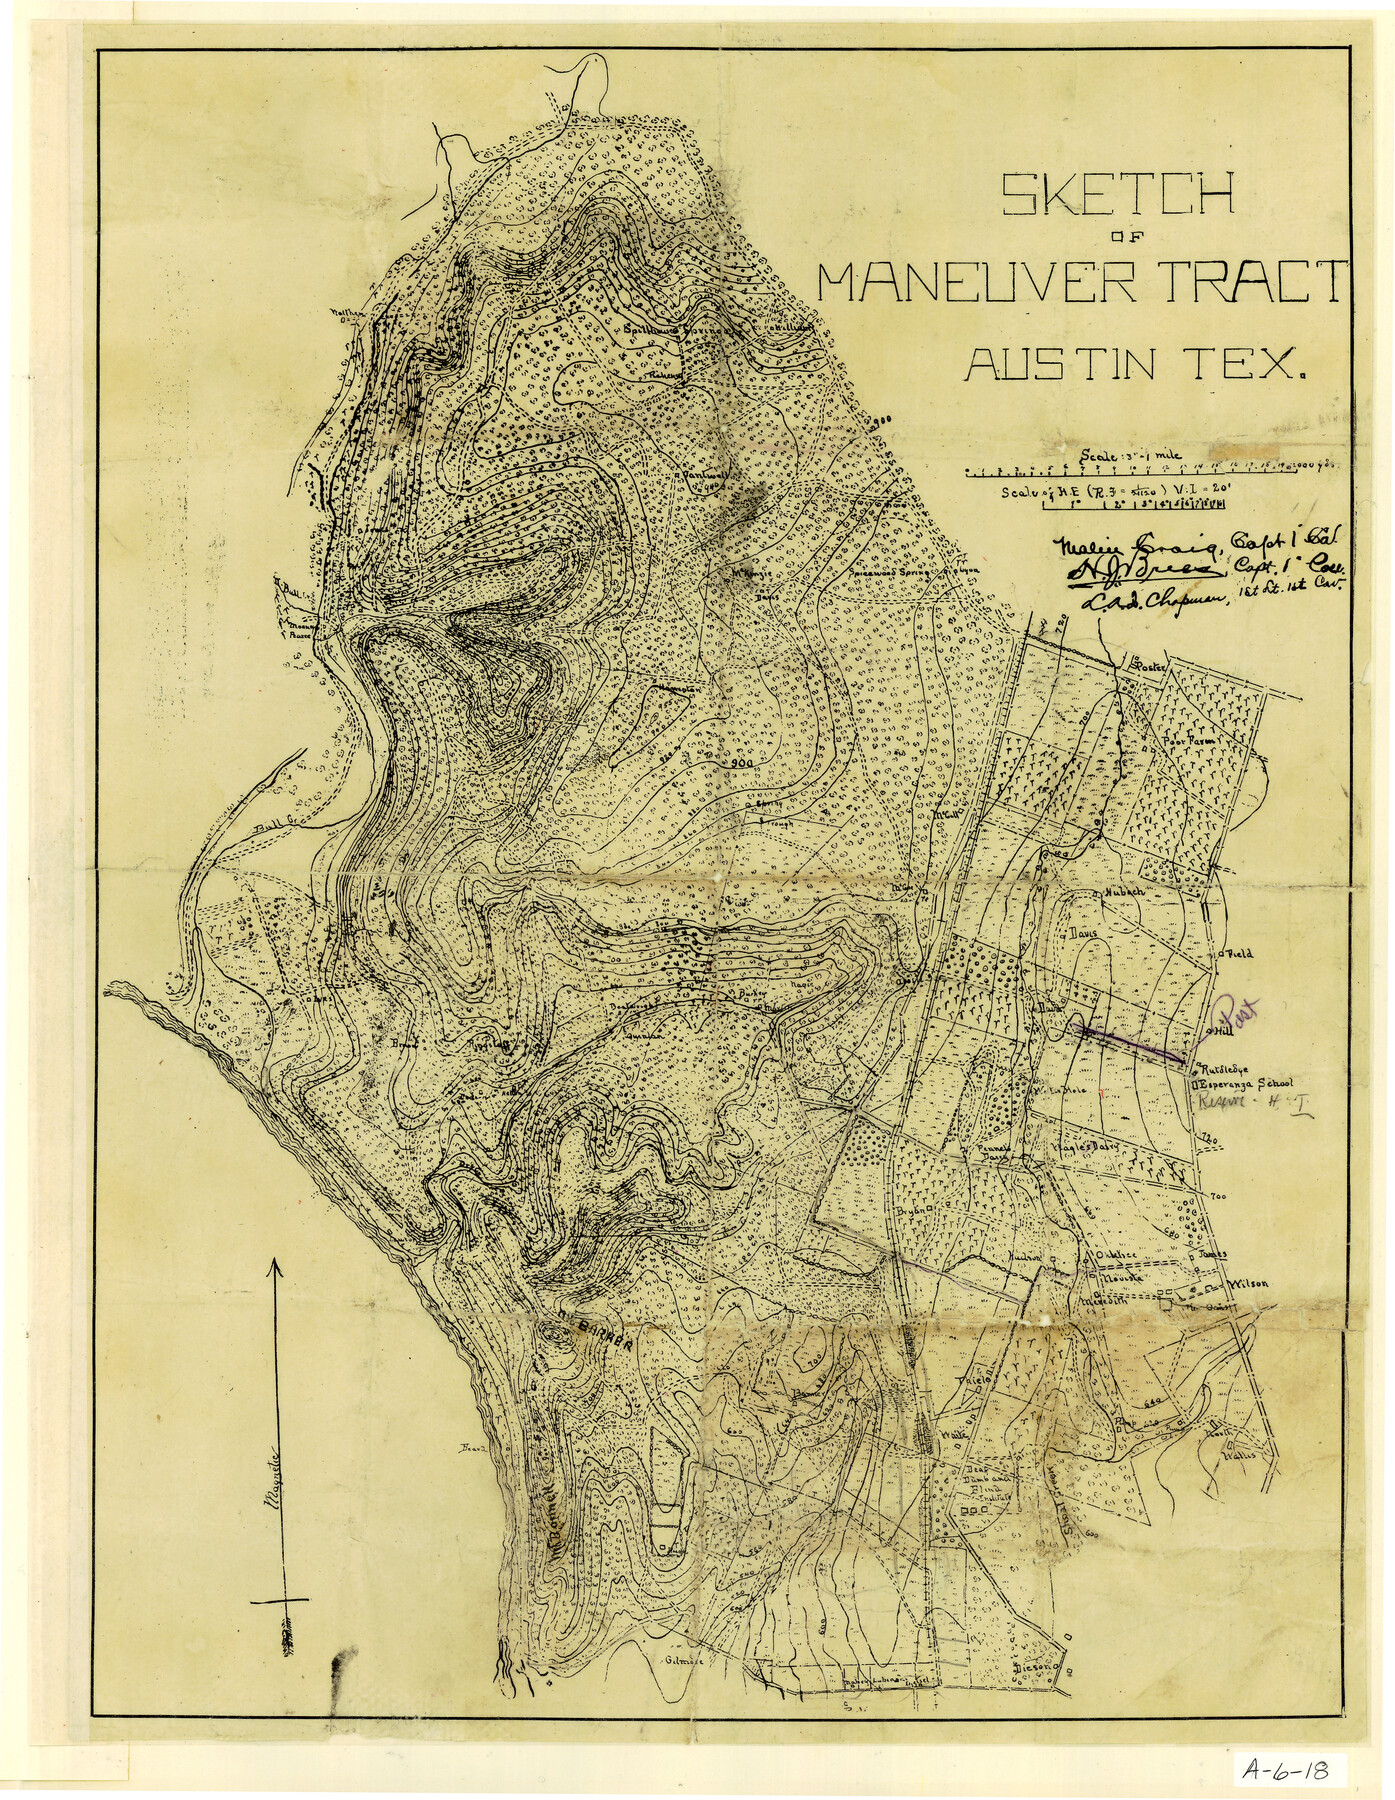 2184, Sketch of Maneuver Tract, General Map Collection